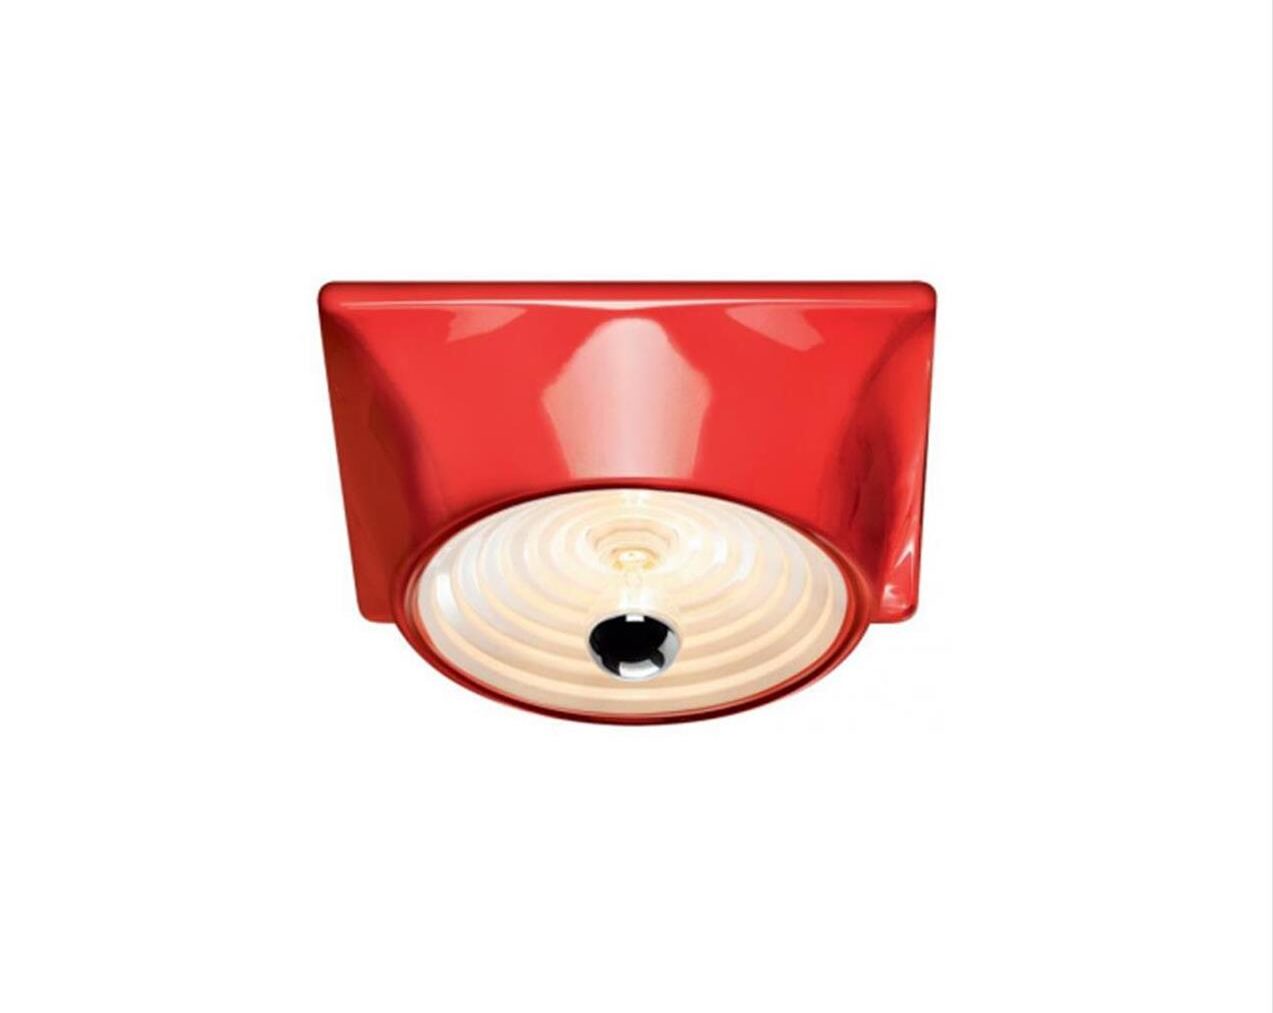 Goletta-Wall--Ceiling-Lamp-White-Ral-9016--Red-Ral-3020